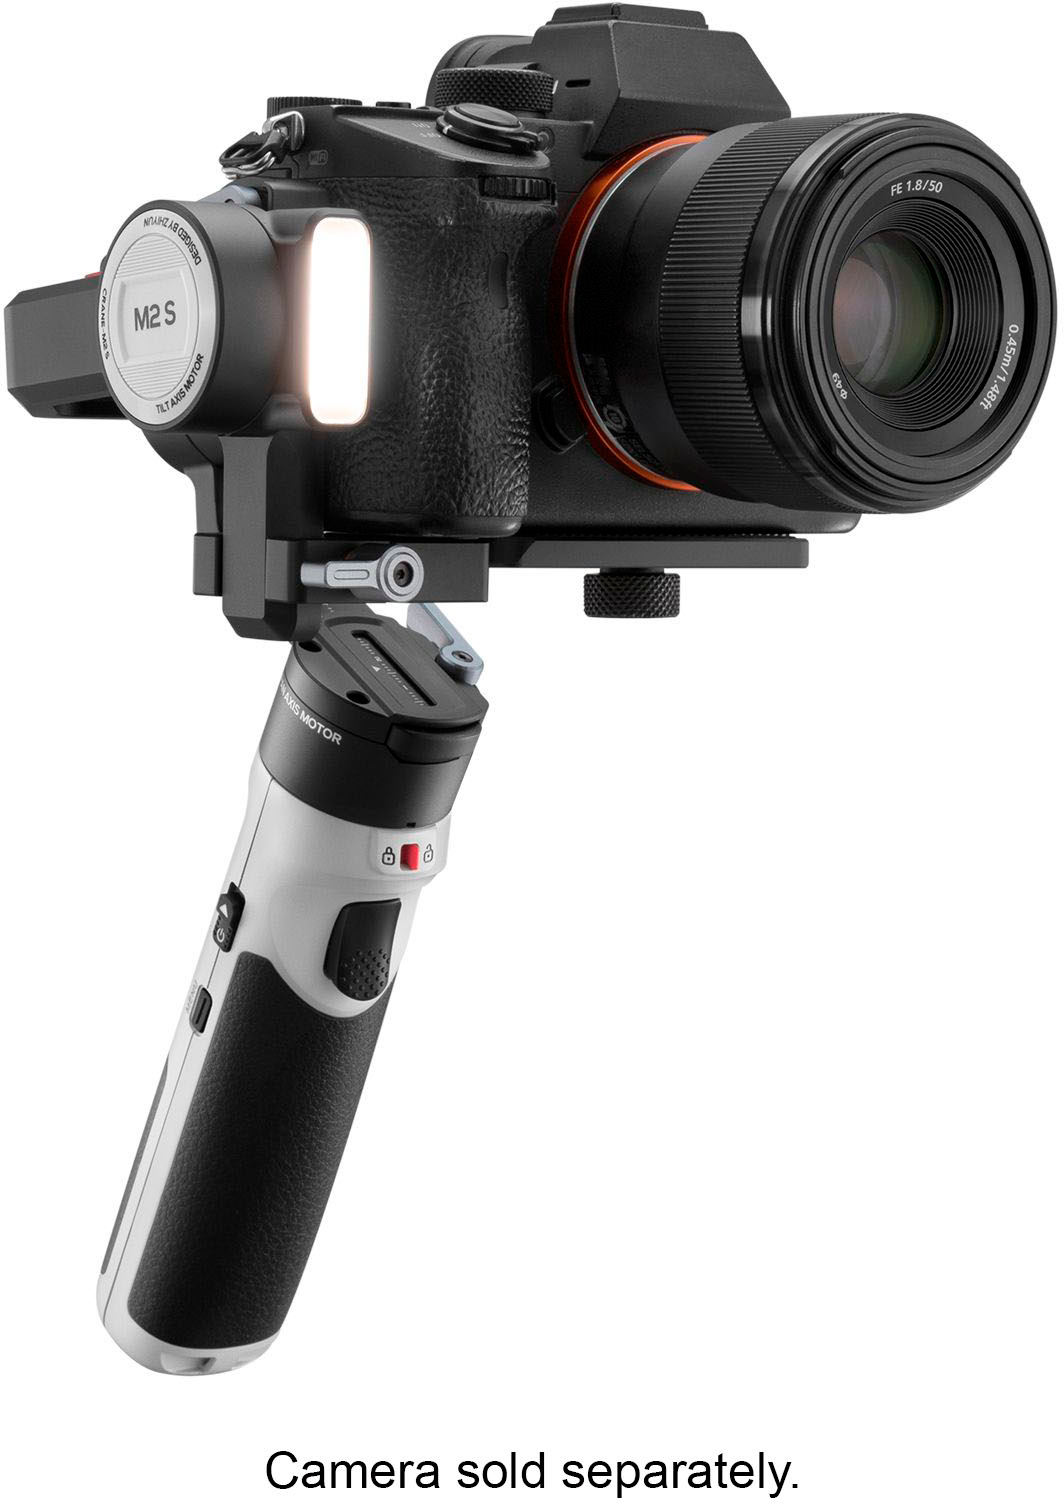 Zhiyun Crane M2S Handheld 3-Axis Gimbal Stabilizer for Camera and